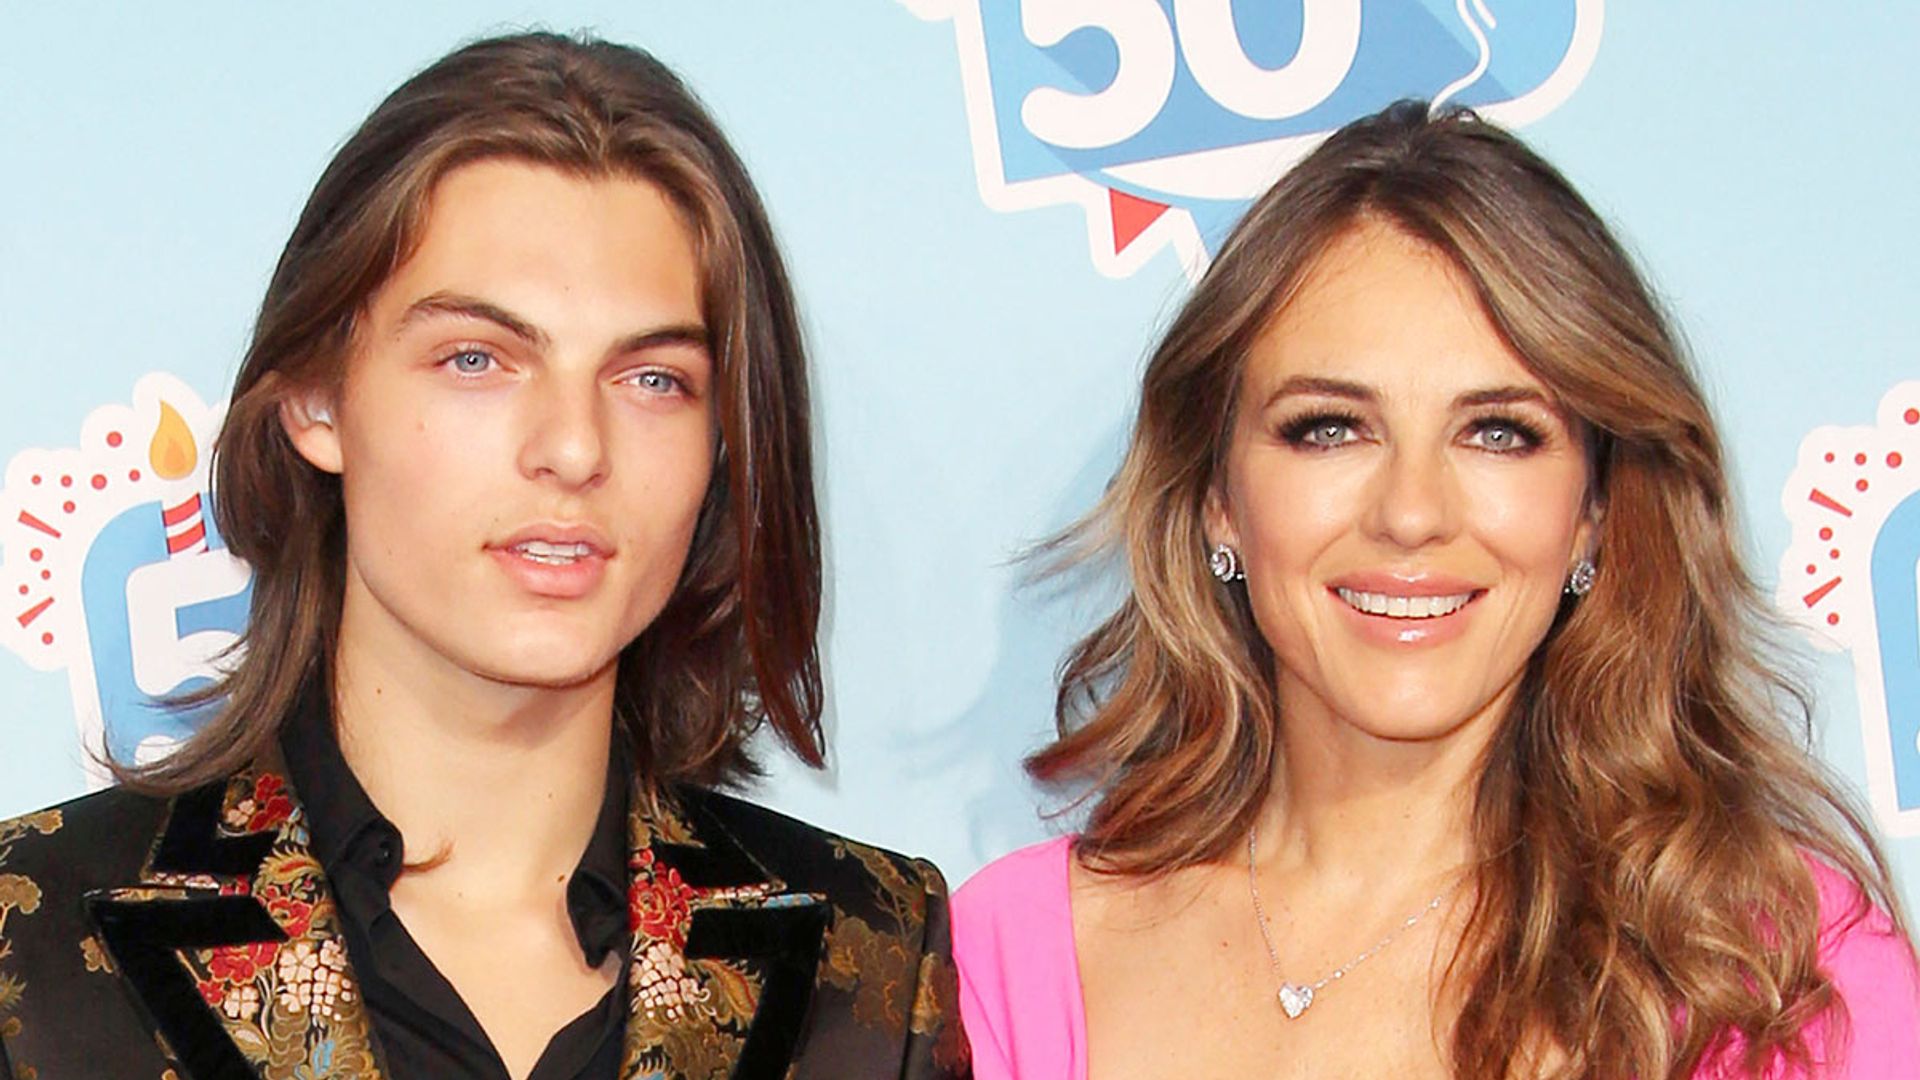 All About Elizabeth Hurley's Son Damian Hurley